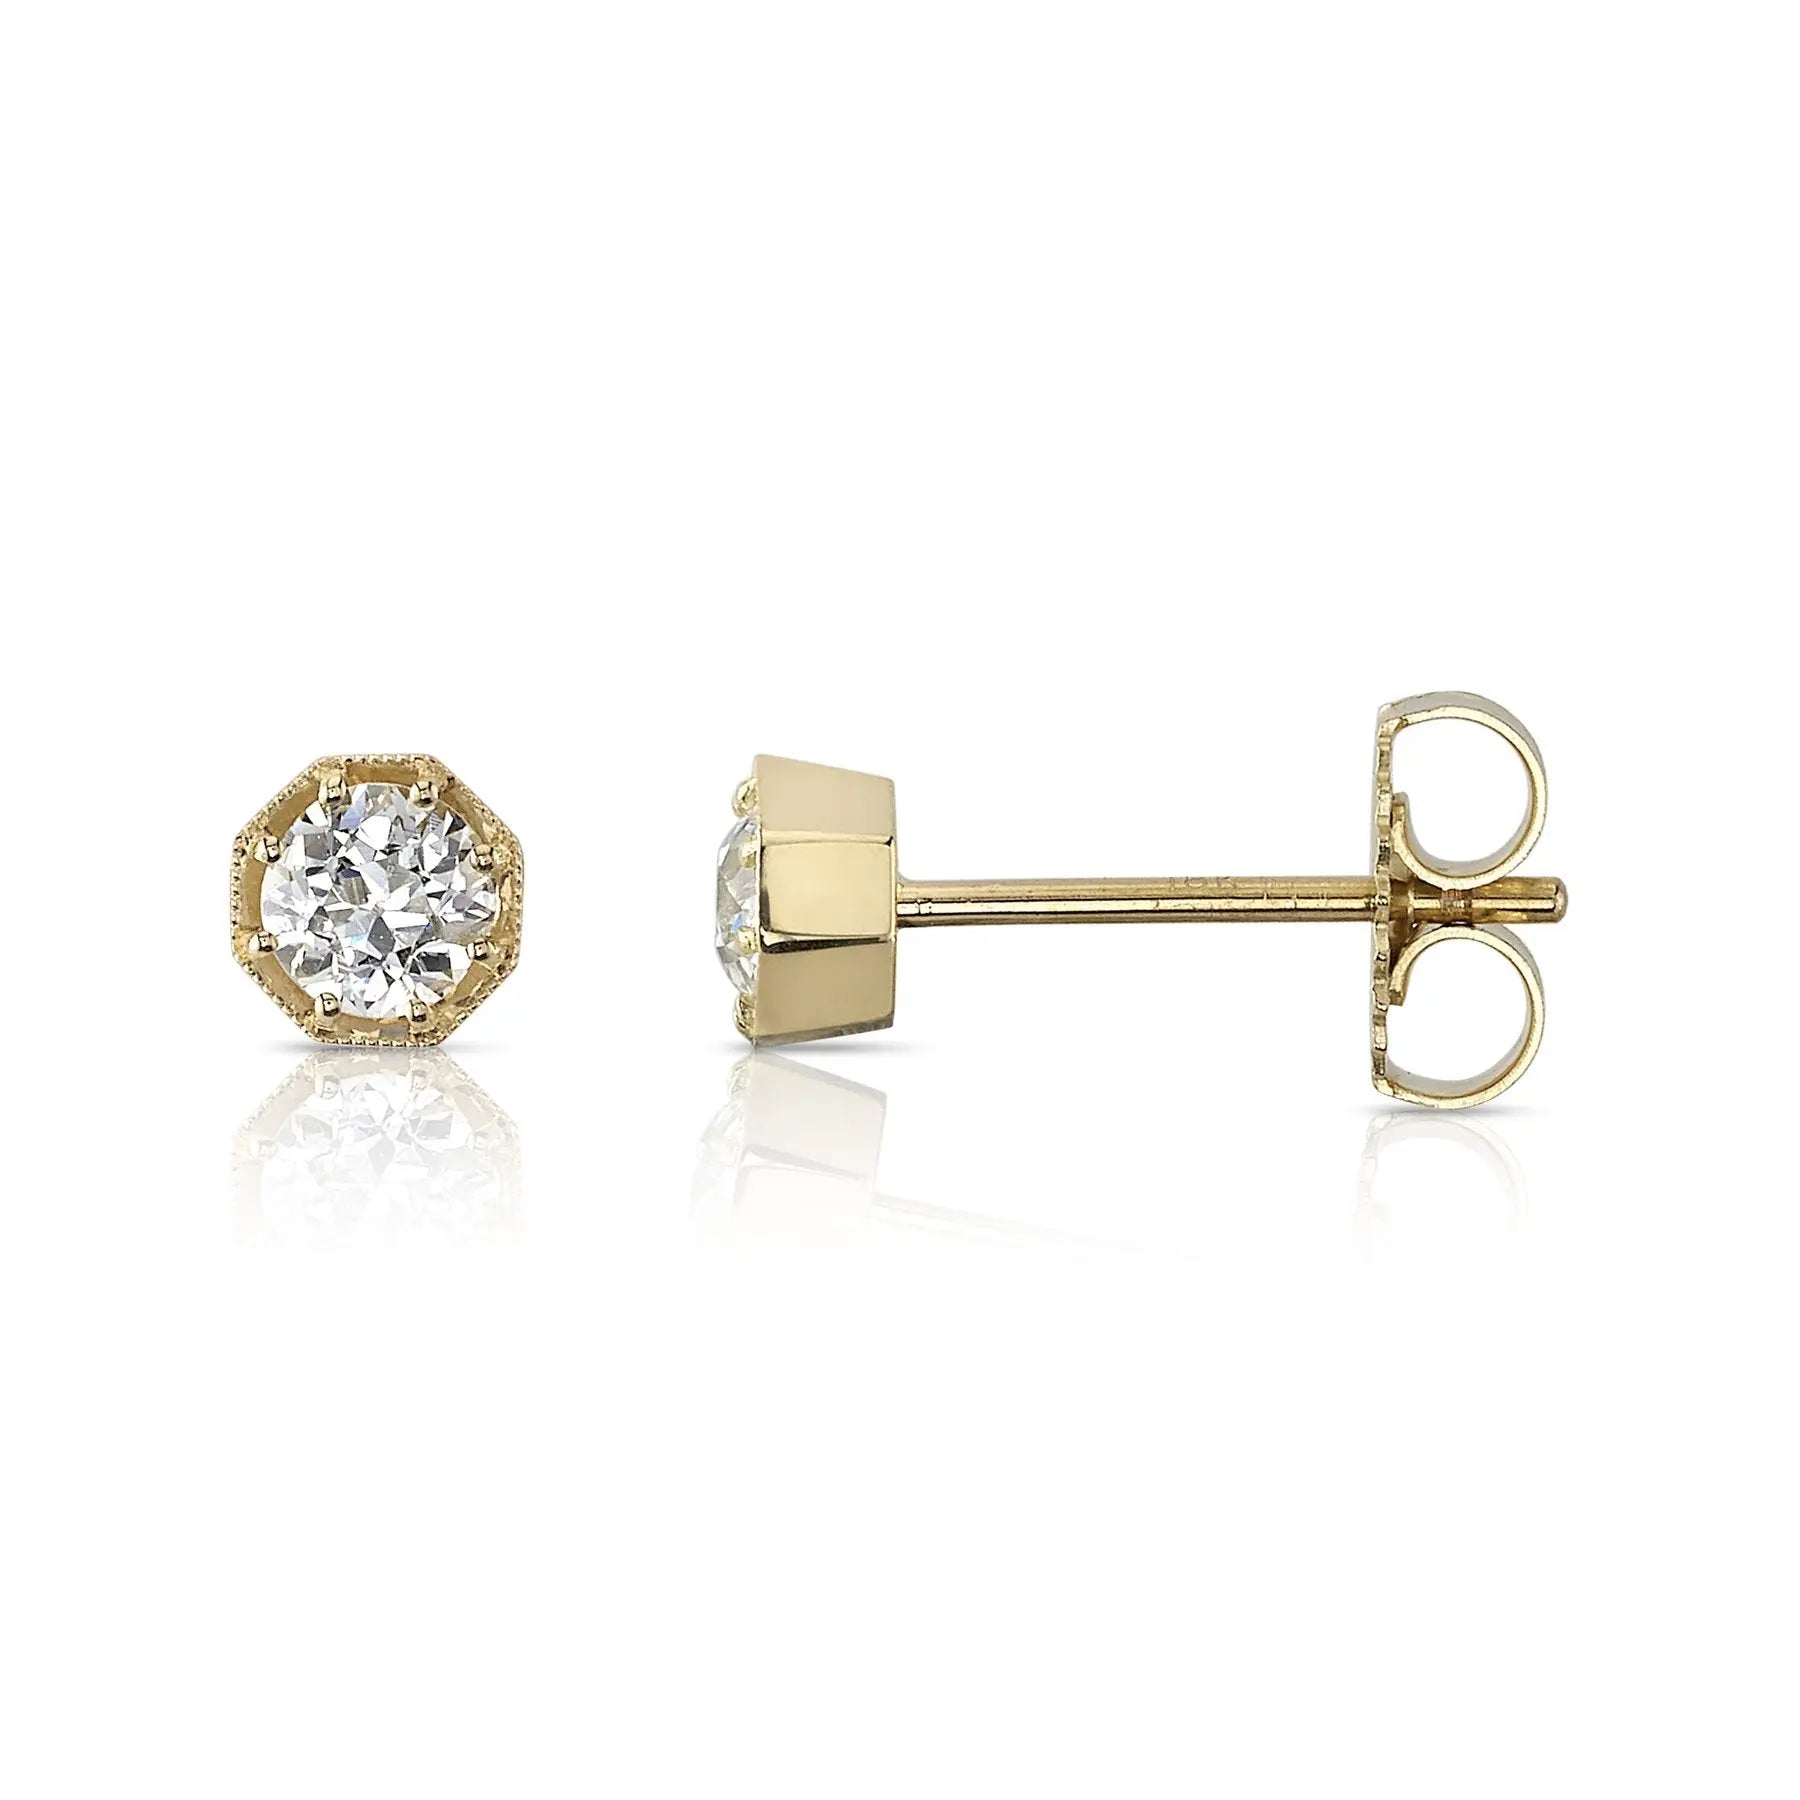 Not your average diamond studs!   0.56ctw K-L/SI1-SI2 Old Mine cut diamonds prong set in handcrafted octagonal  18K yellow gold   Designed by Single Stone and made in LA